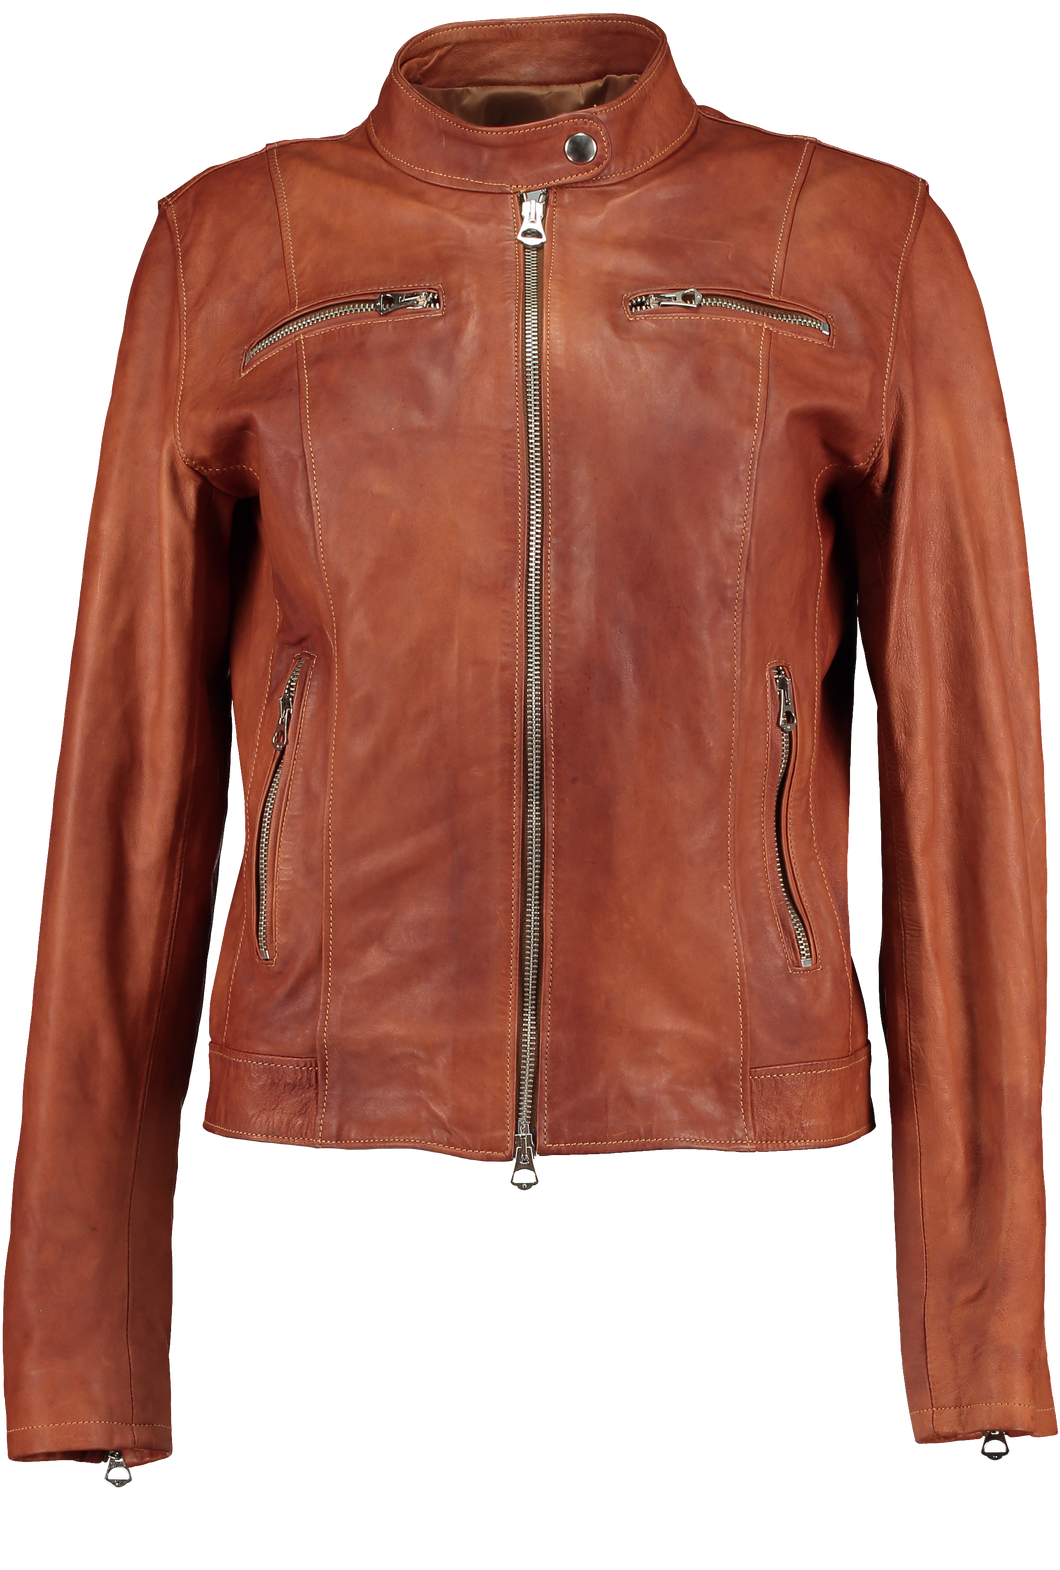 Women's Banded-Collar Moto Racer Leather Jacket